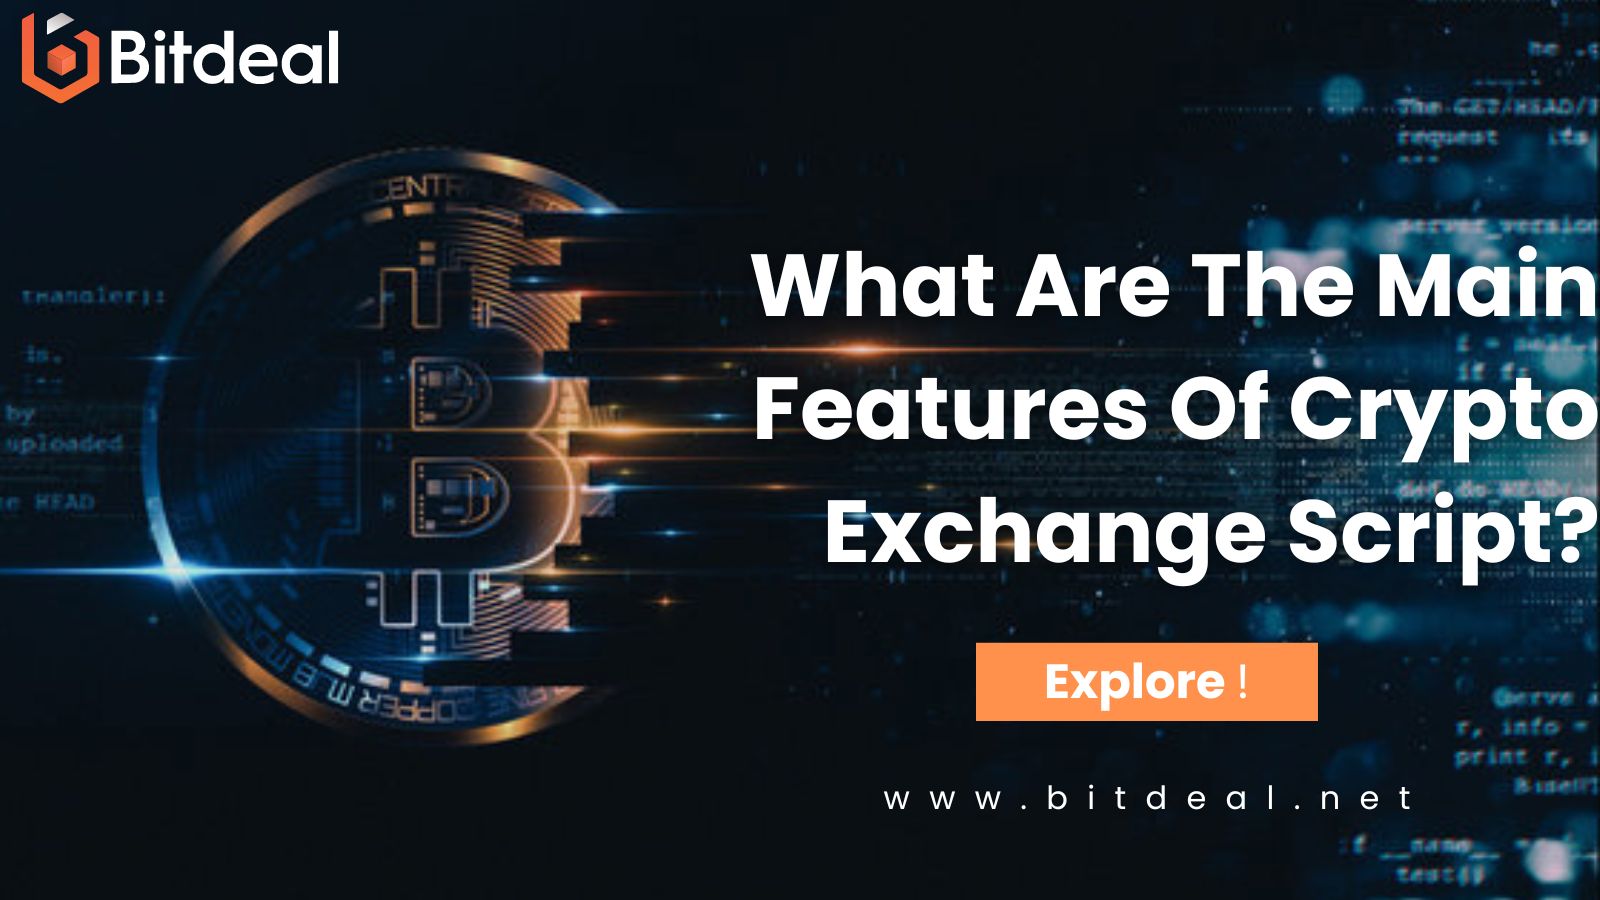 What Are The Top 5 Features Of Crypto Exchange Script?